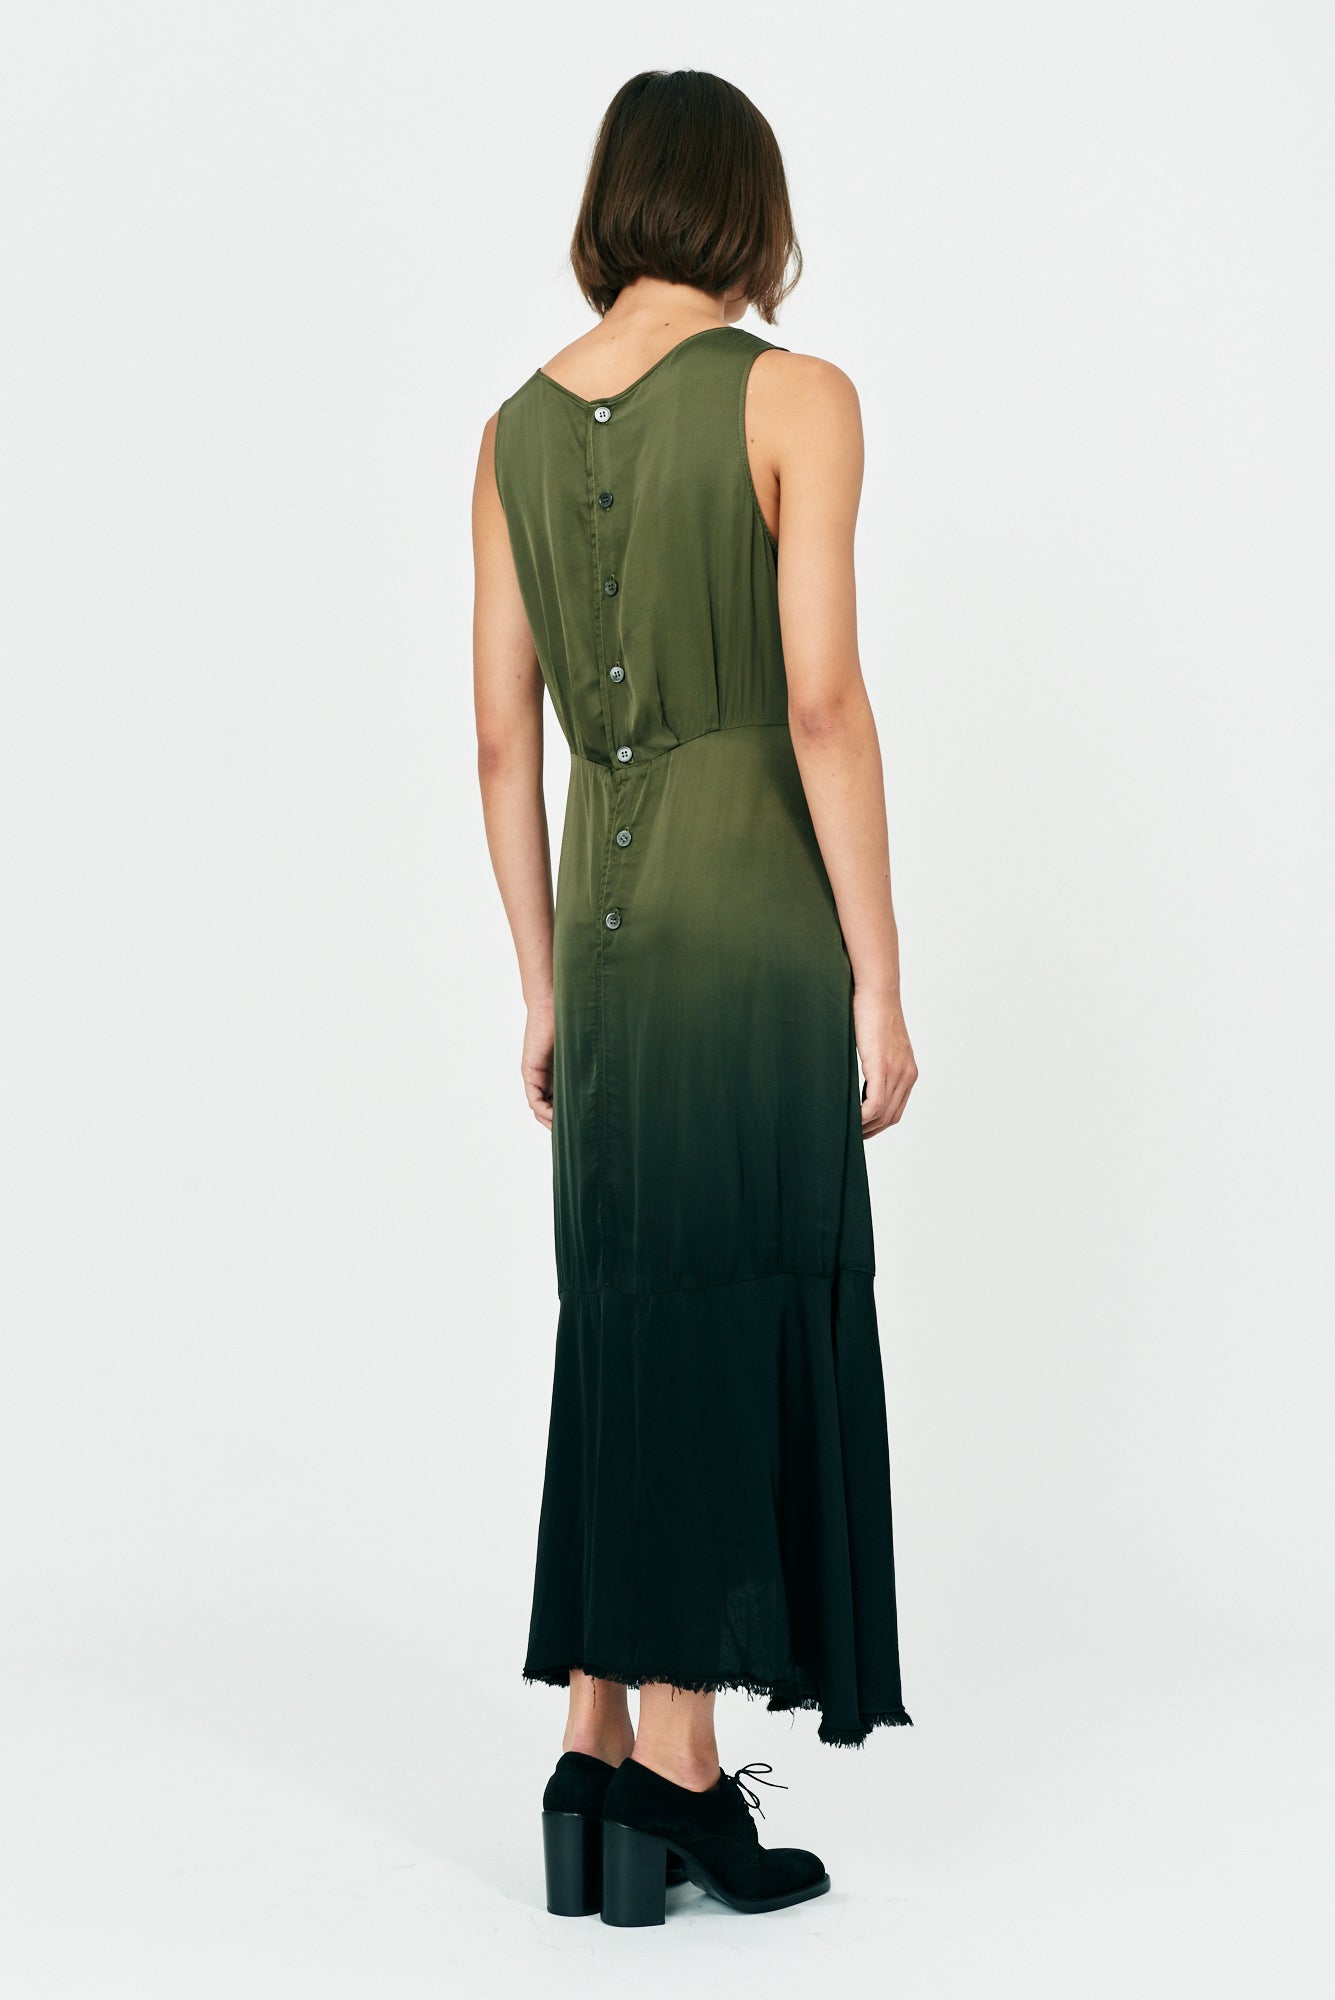 Forest Gradient Ghost Ranch Matte Satin Frida Dress Full Back View